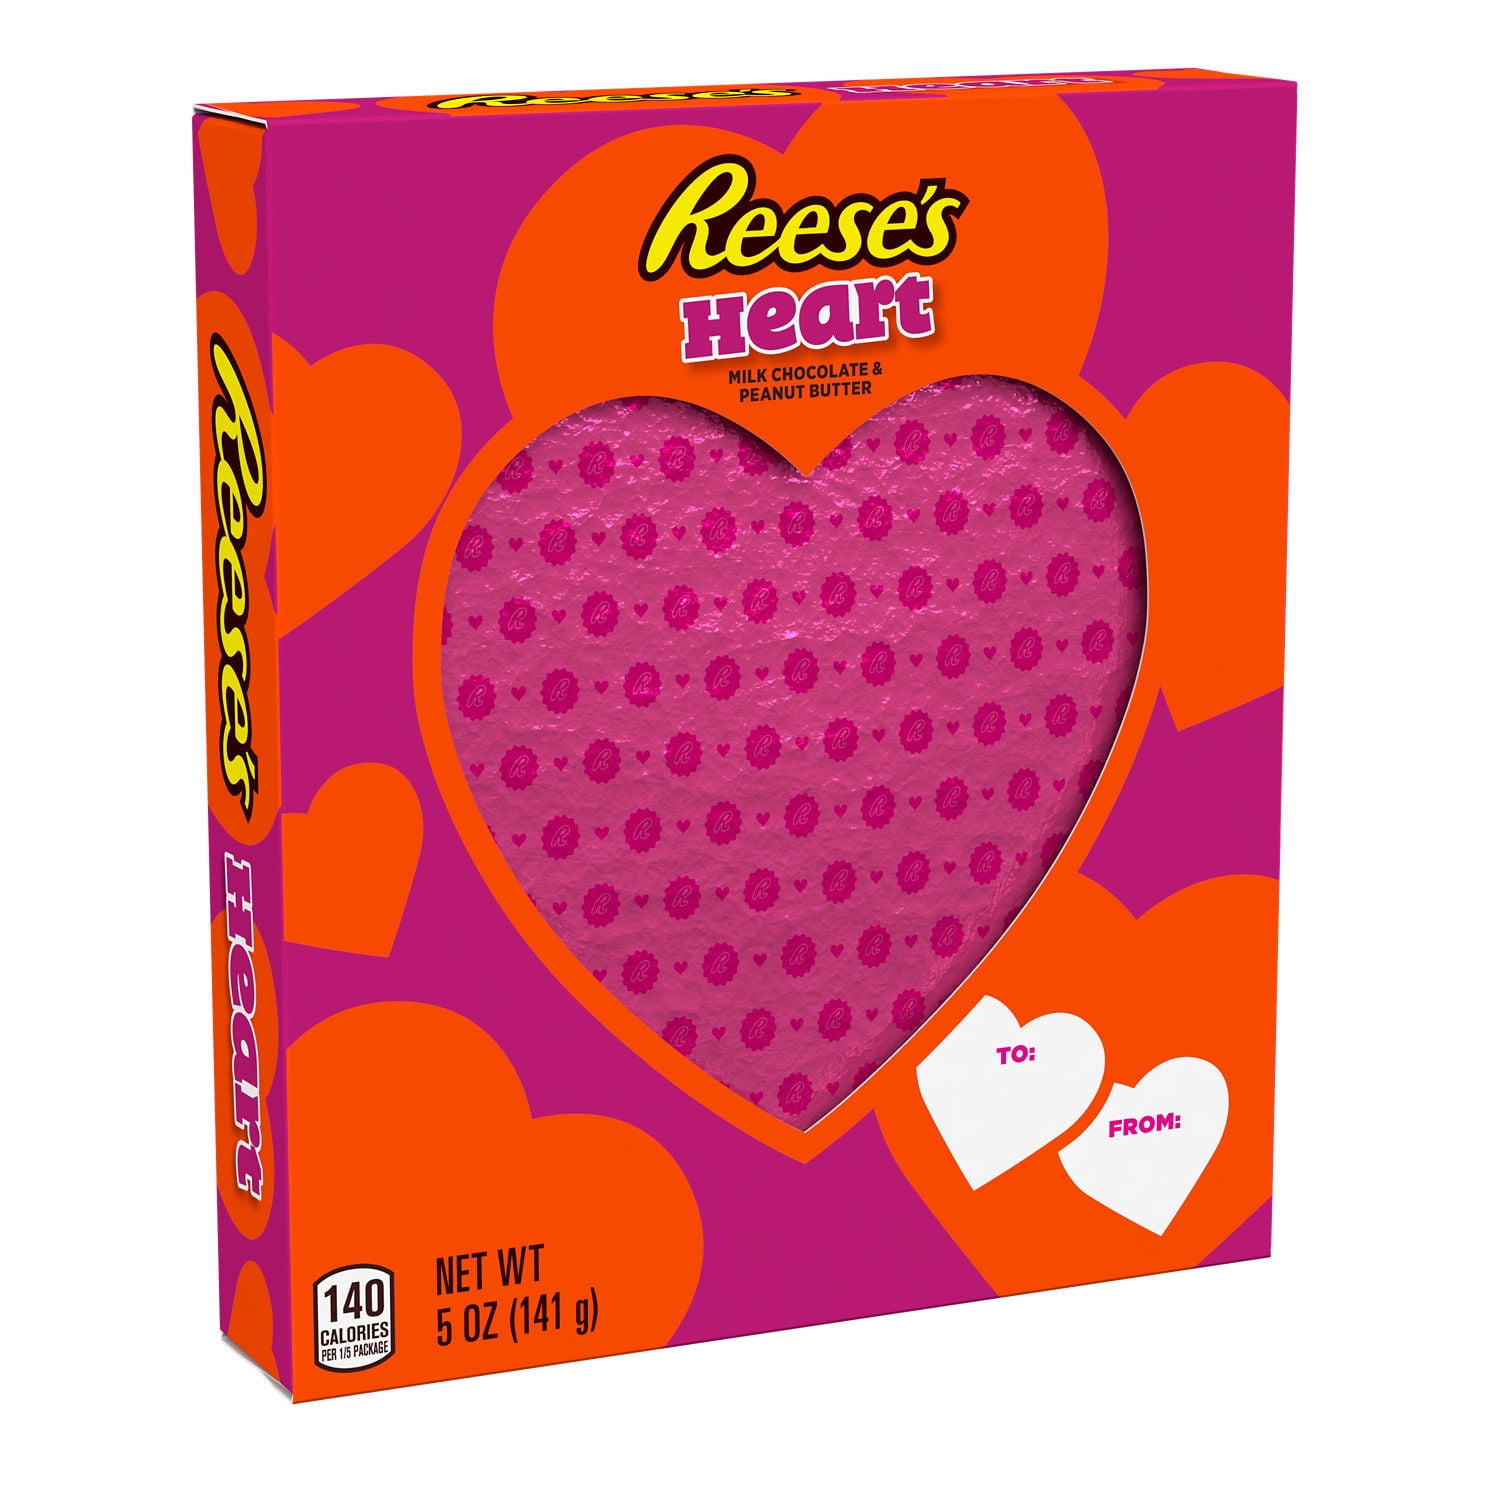 REESE'S, Milk Chocolate Peanut Butter Heart Candy, Valentine's Day, 5 oz, Gift Box